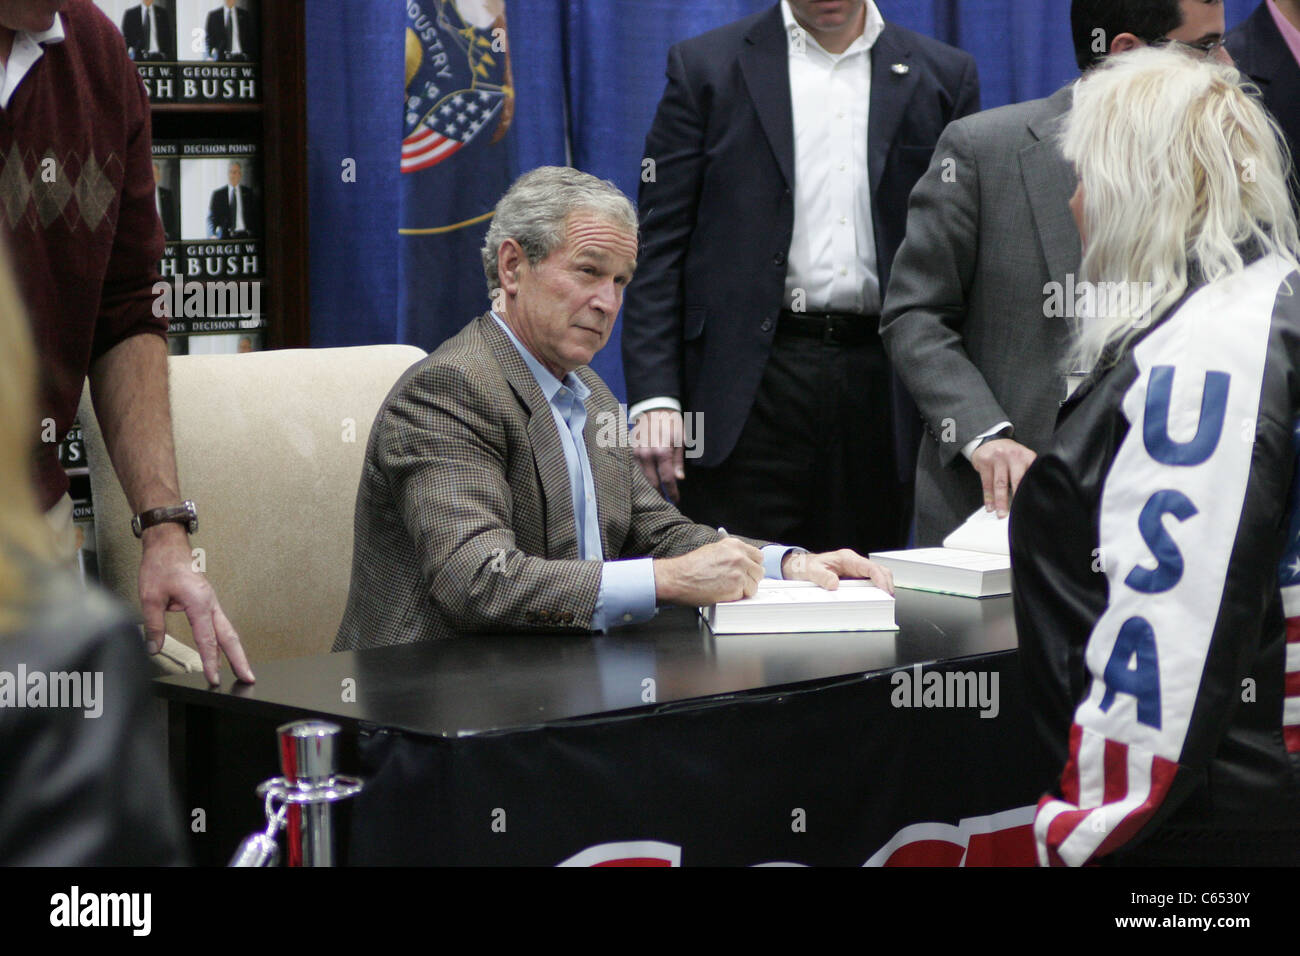 Former President George W. Bush at a public appearance for George Bush DECISION POINTS Book Signing, Costco, Sandy, UT November Stock Photo